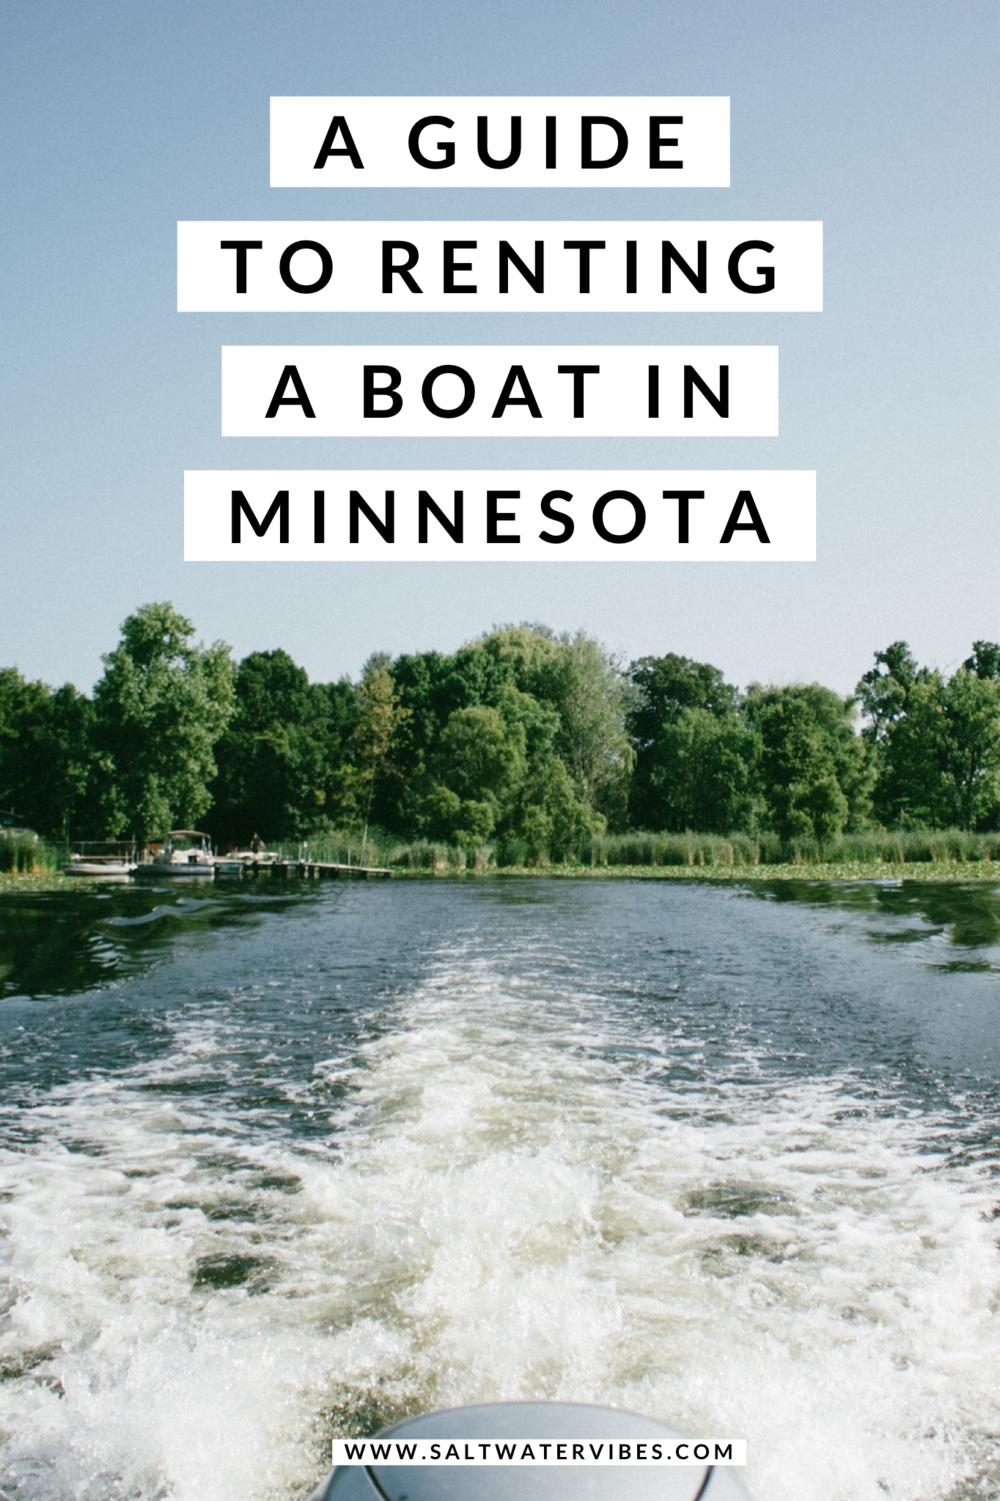 Boating With Bald Eagle Boat Rental Minnesota | SaltWaterVibes